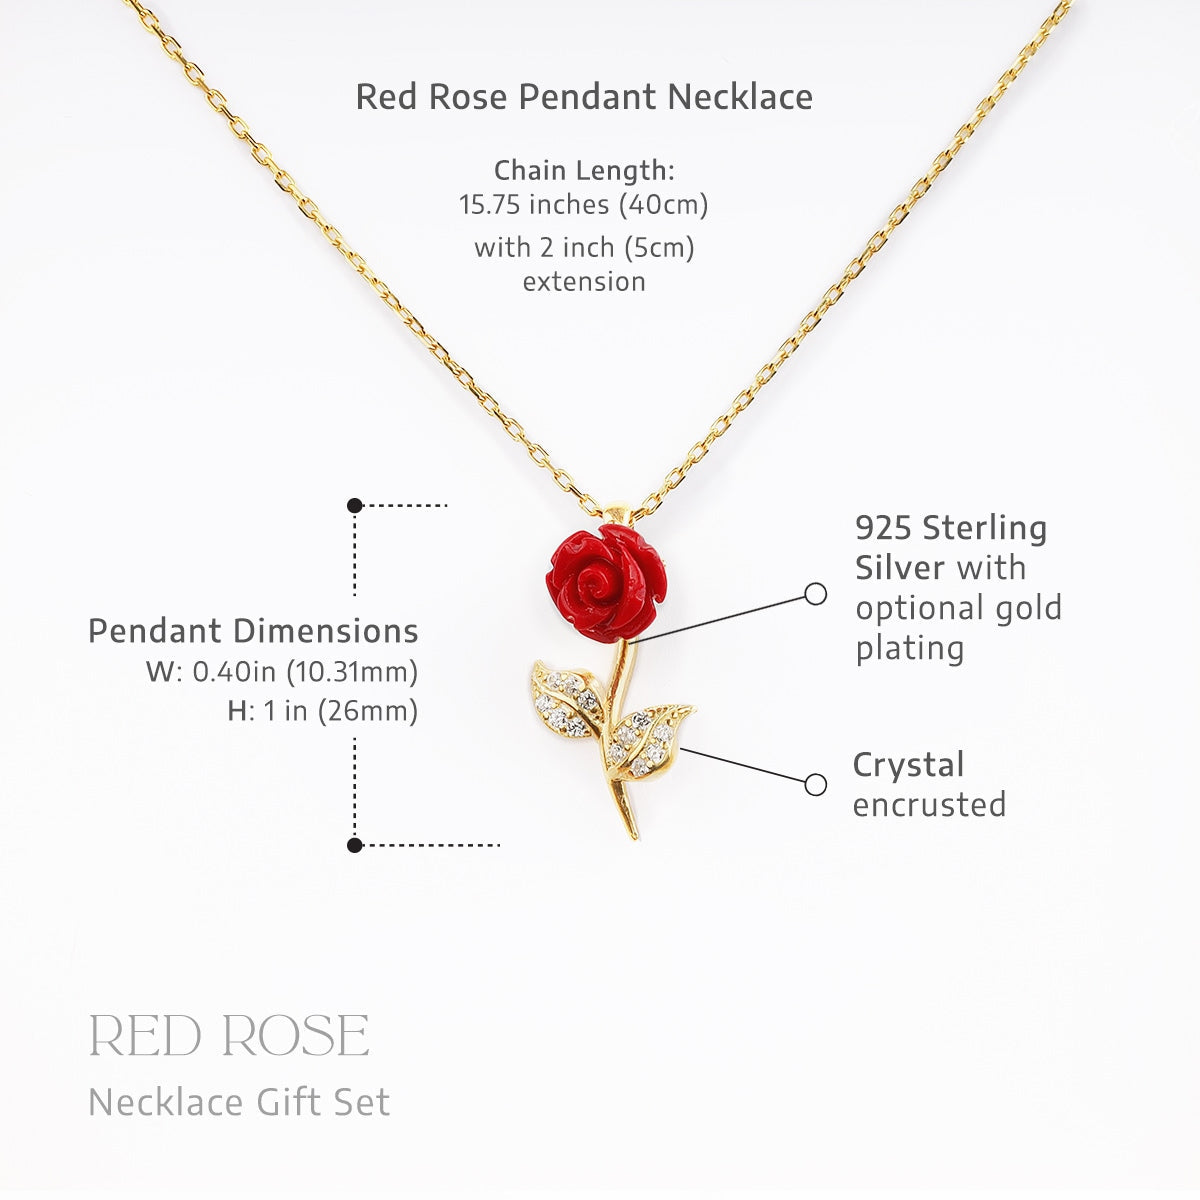 Beautiful Wife On Our Anniversary - Red Rose Necklace Gift Set